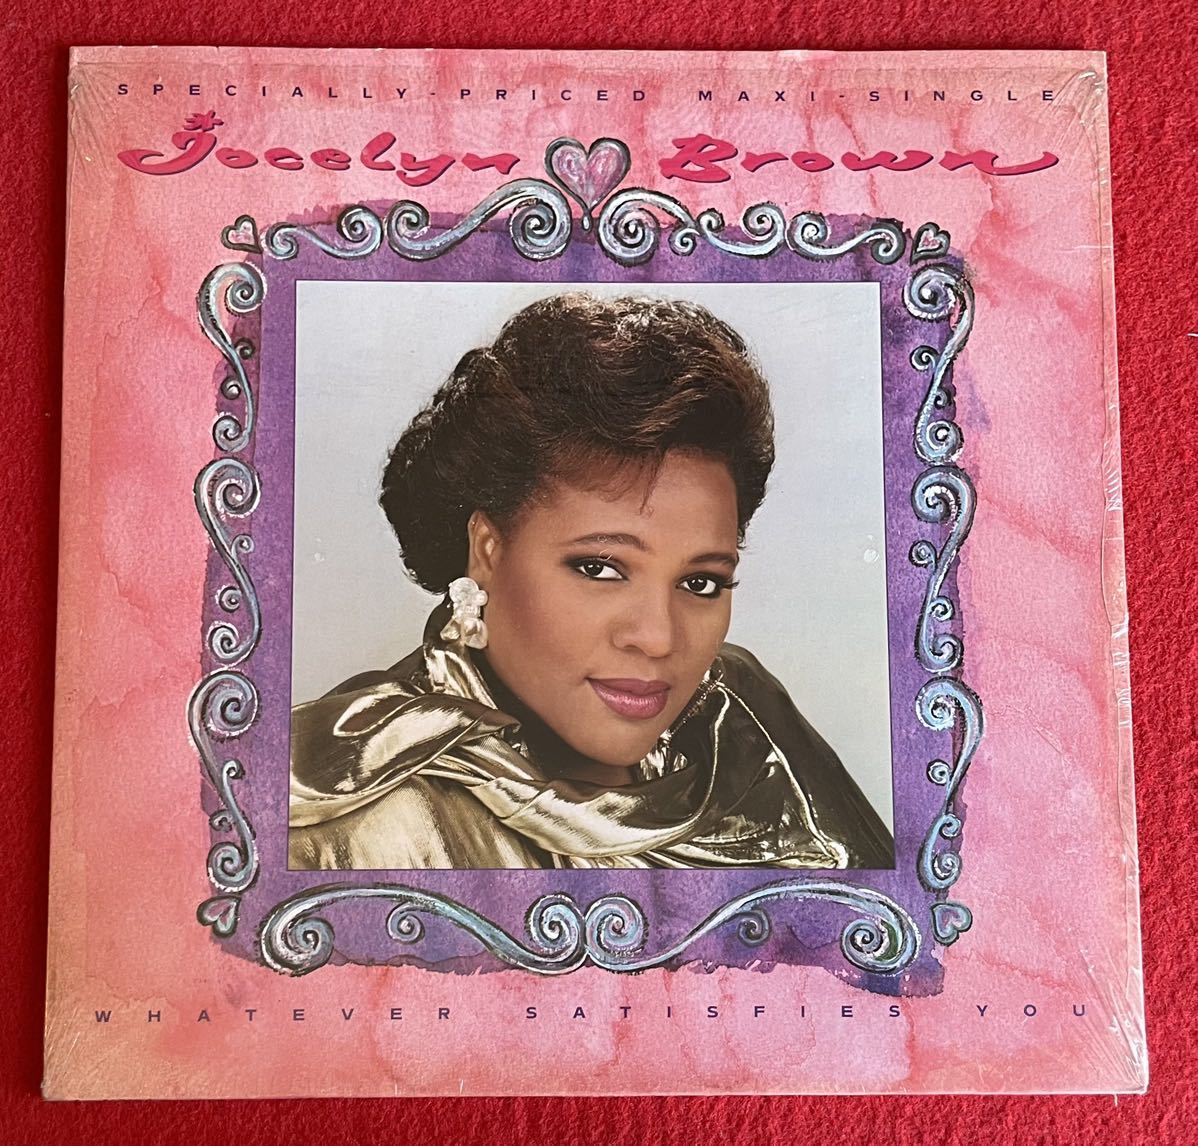 Jocelyn Brown / Caught In The Act ( Extended Dance Mix ) とWhatever Satisfies You 12inch盤 その他にもプロモーション盤 多数出品。_画像1